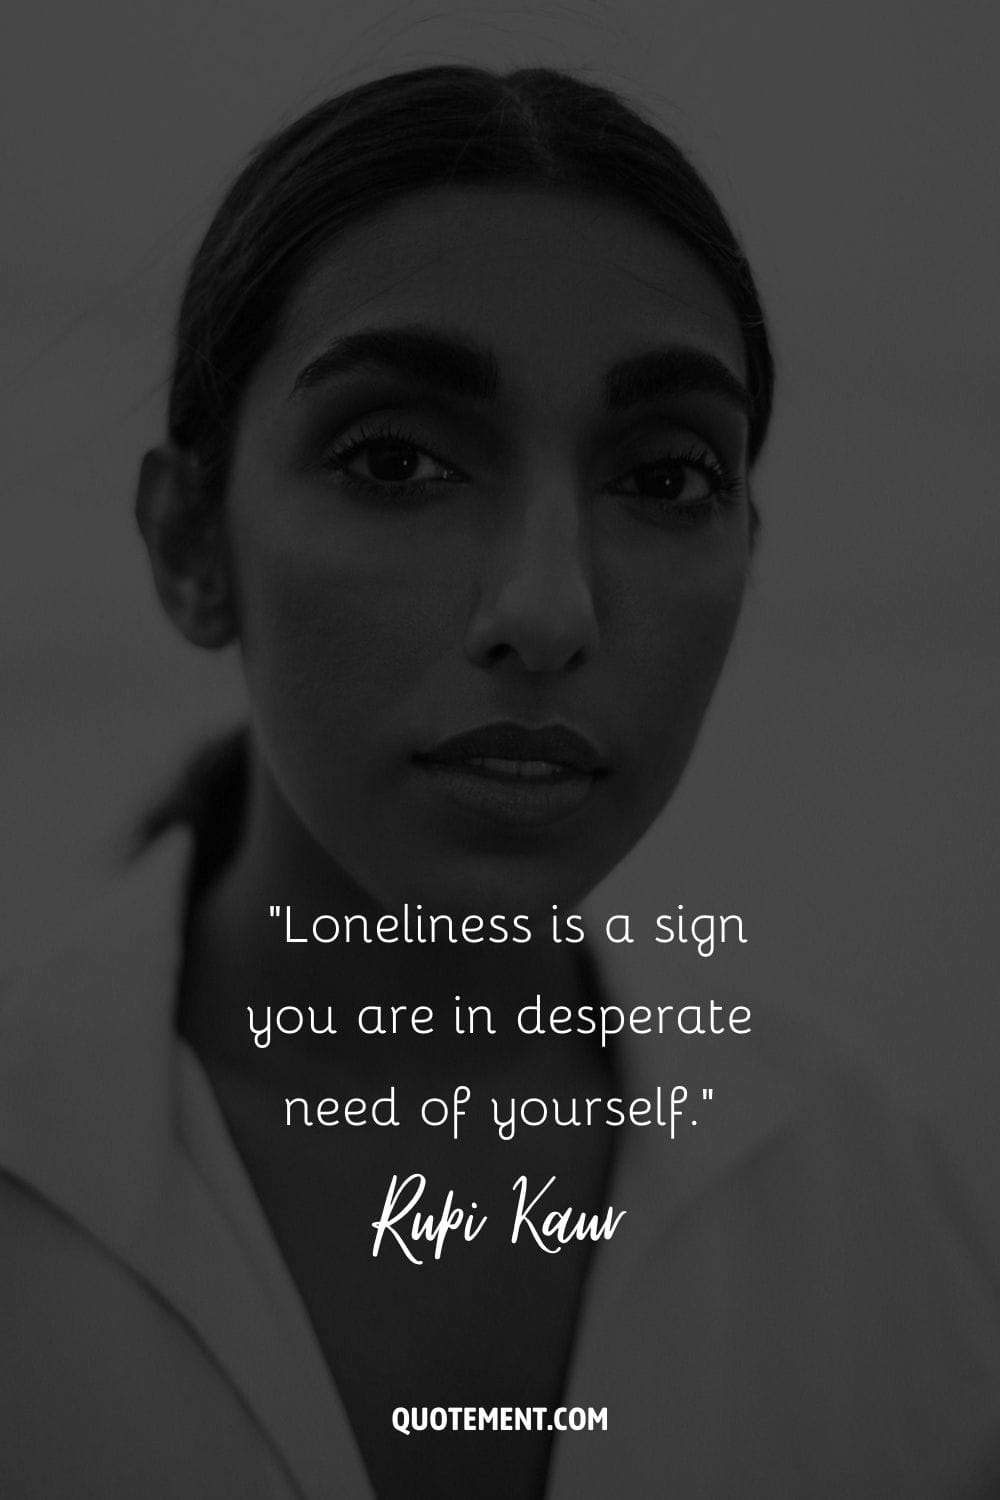 Loneliness is a sign you are in desperate need of yourself.